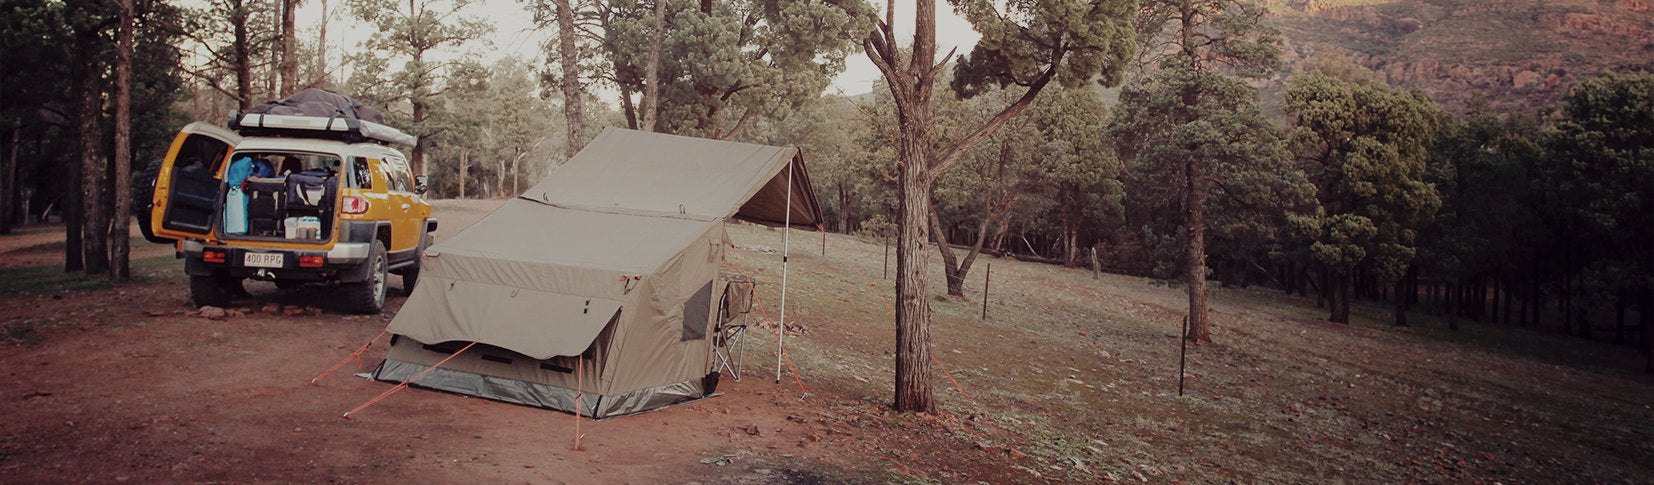 Oztent RV-1 - DISCONTINUED